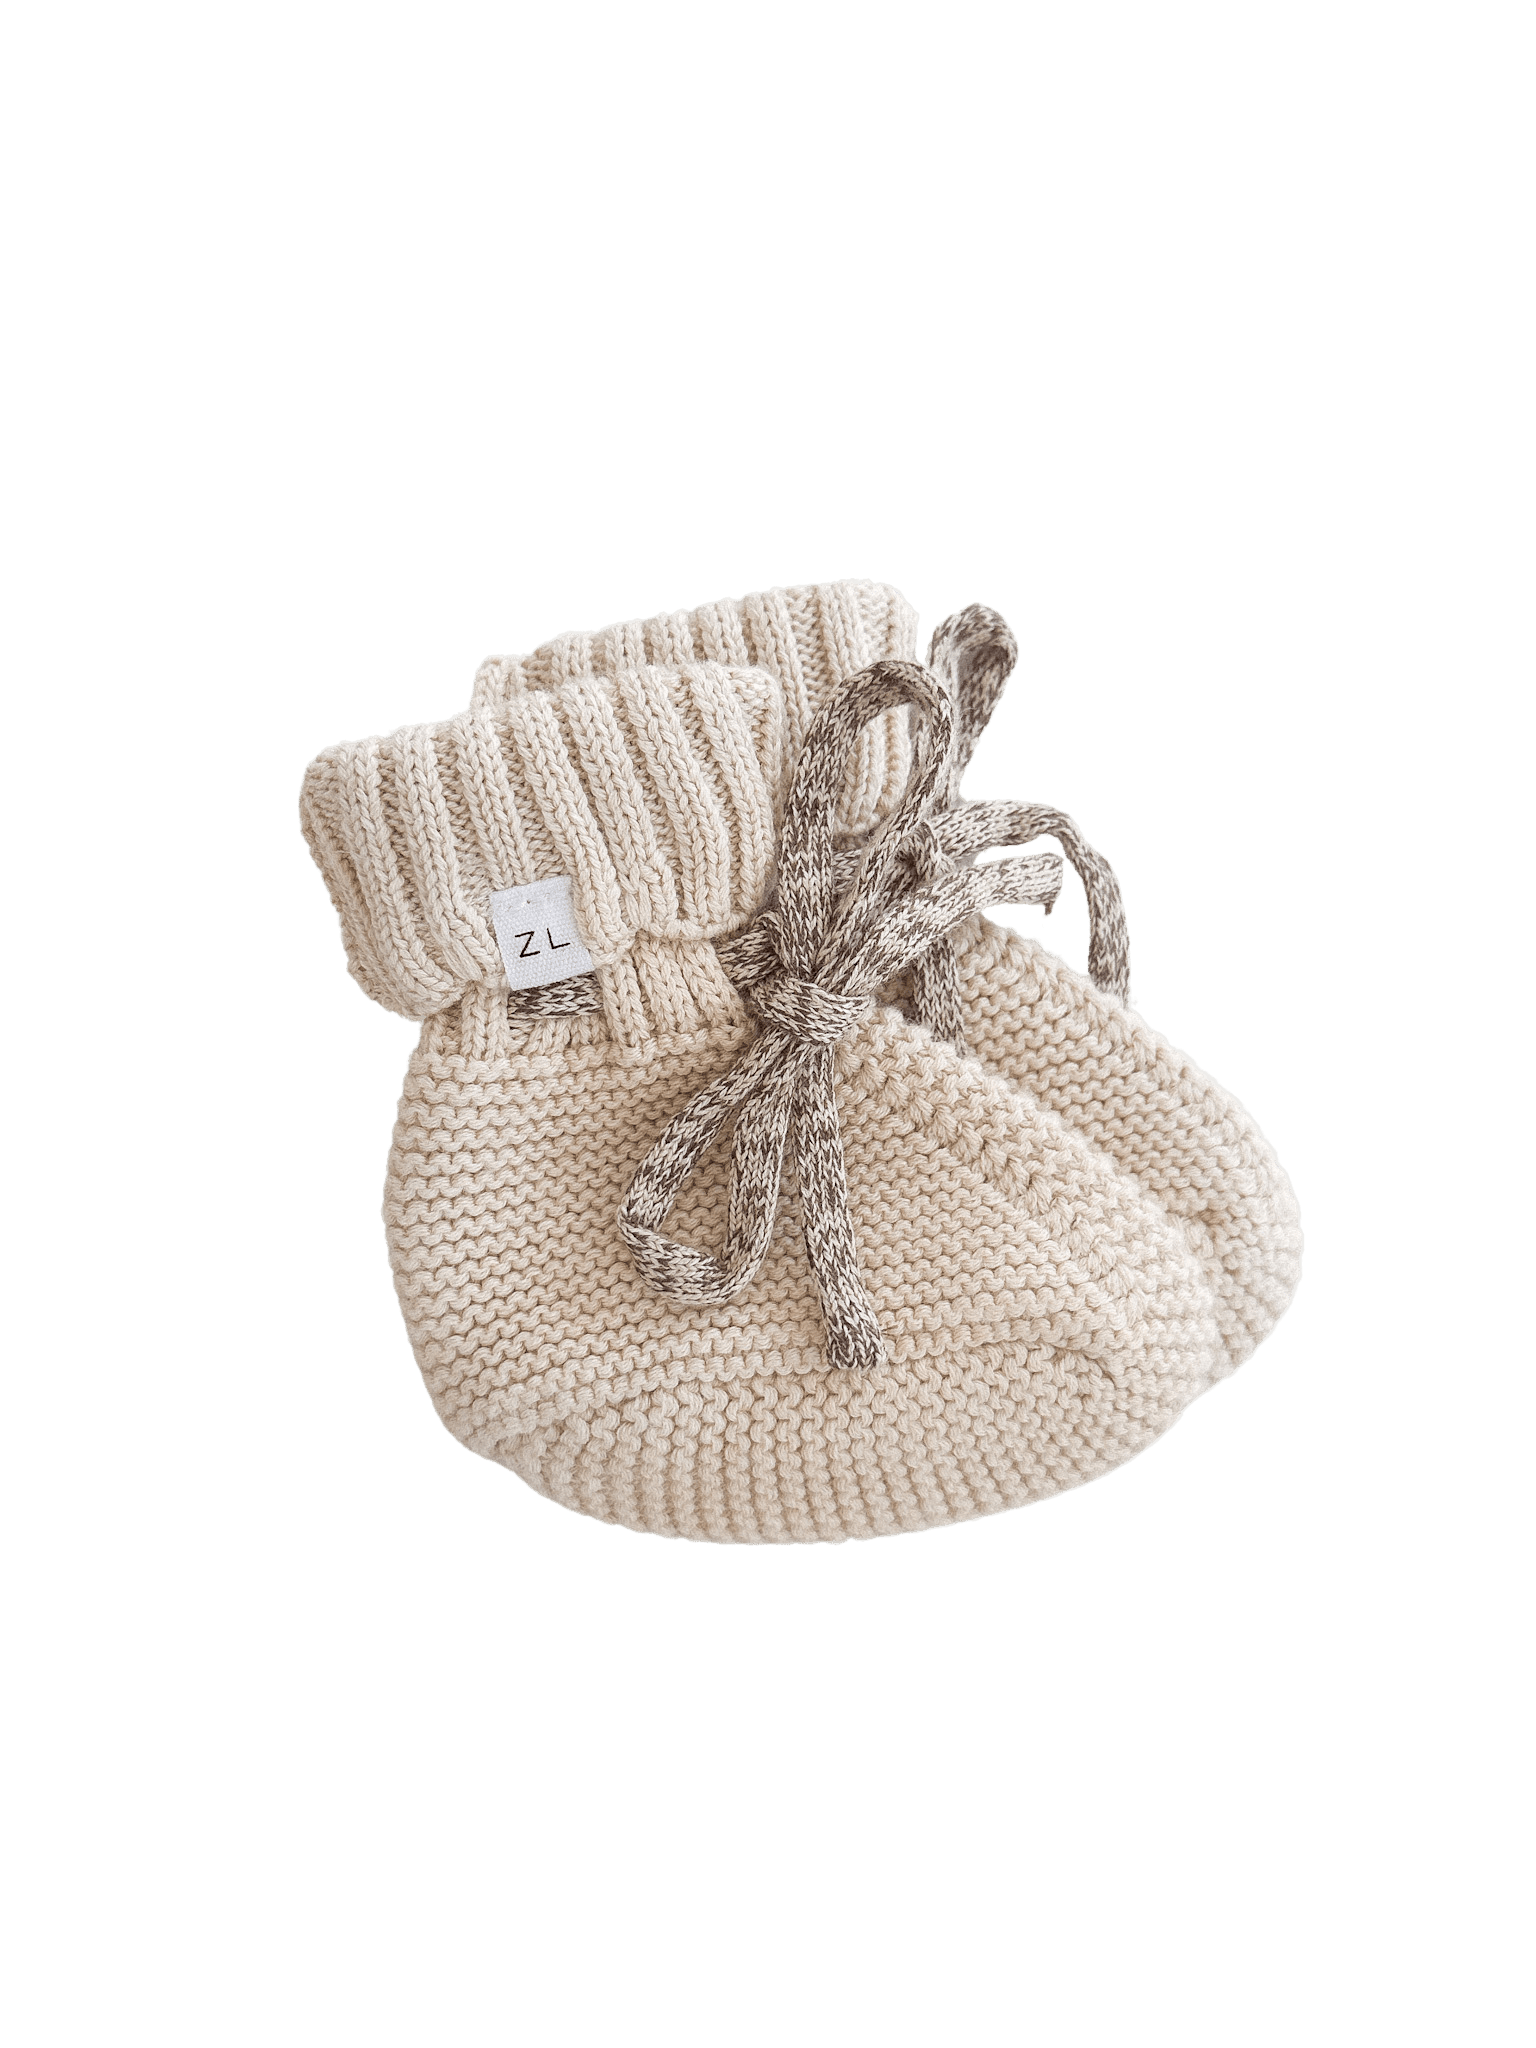 Knit Booties | Cosmo